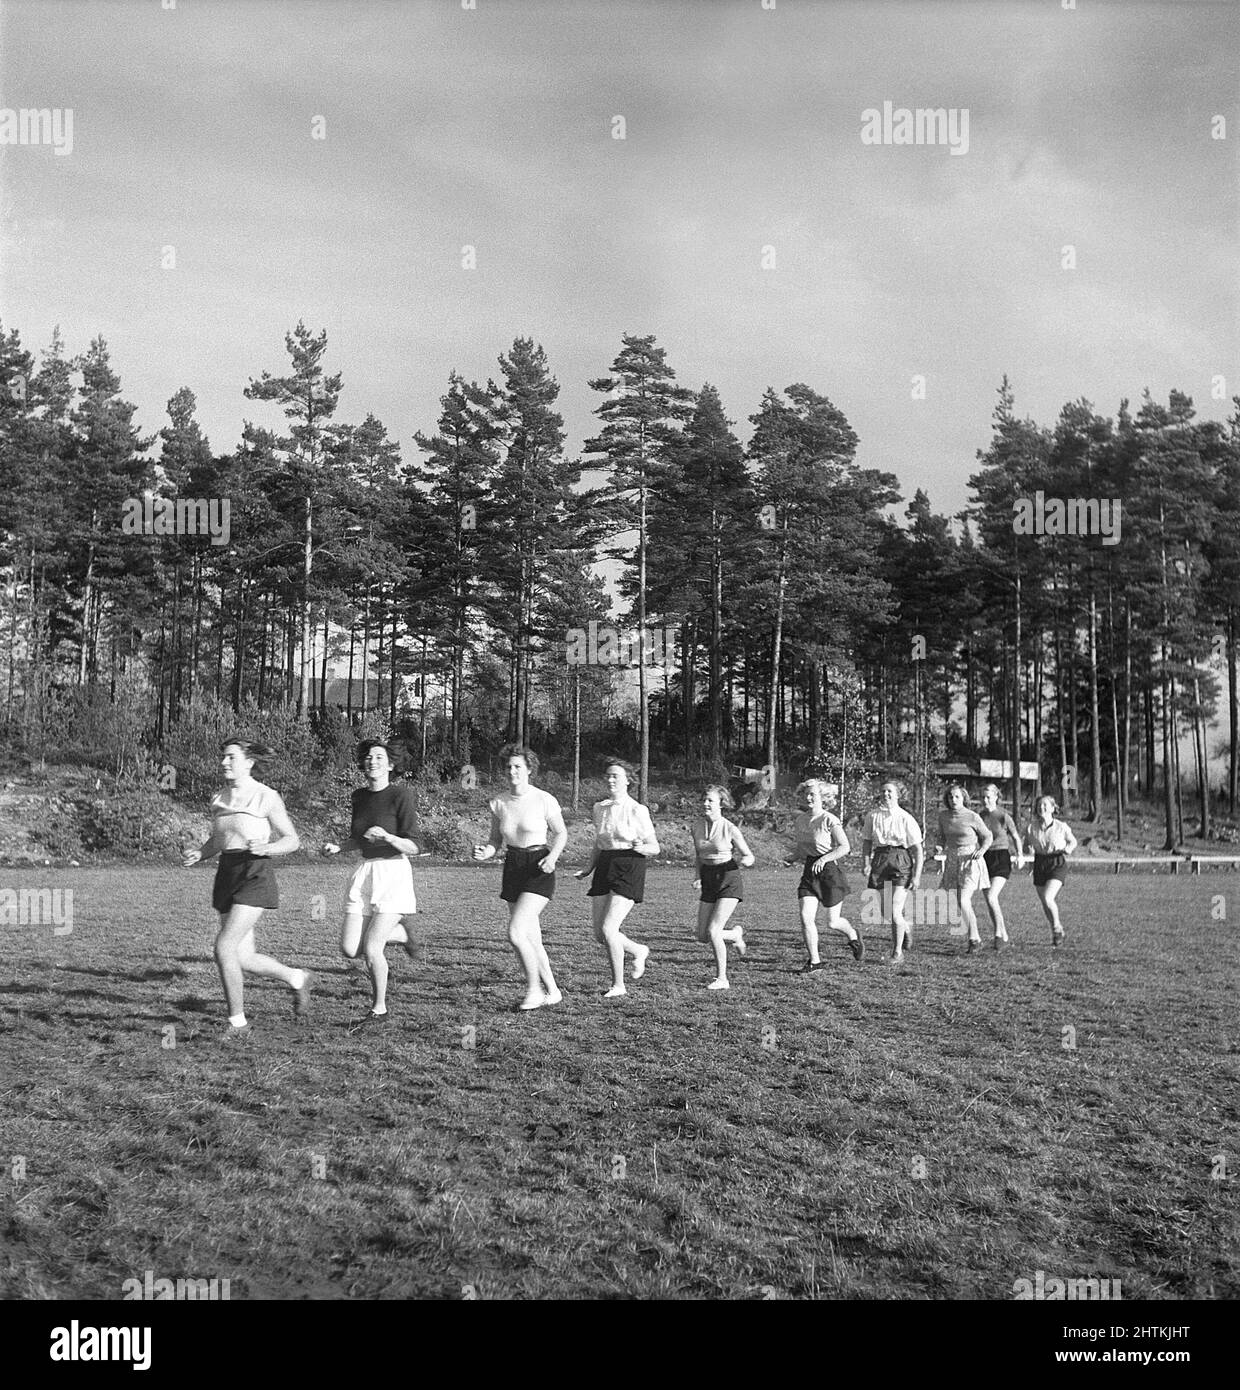 In the 1950s. A women's soccer team during practise are running on the soccer field.  Sweden 1951 Kristoffersson BE37-6 Stock Photo